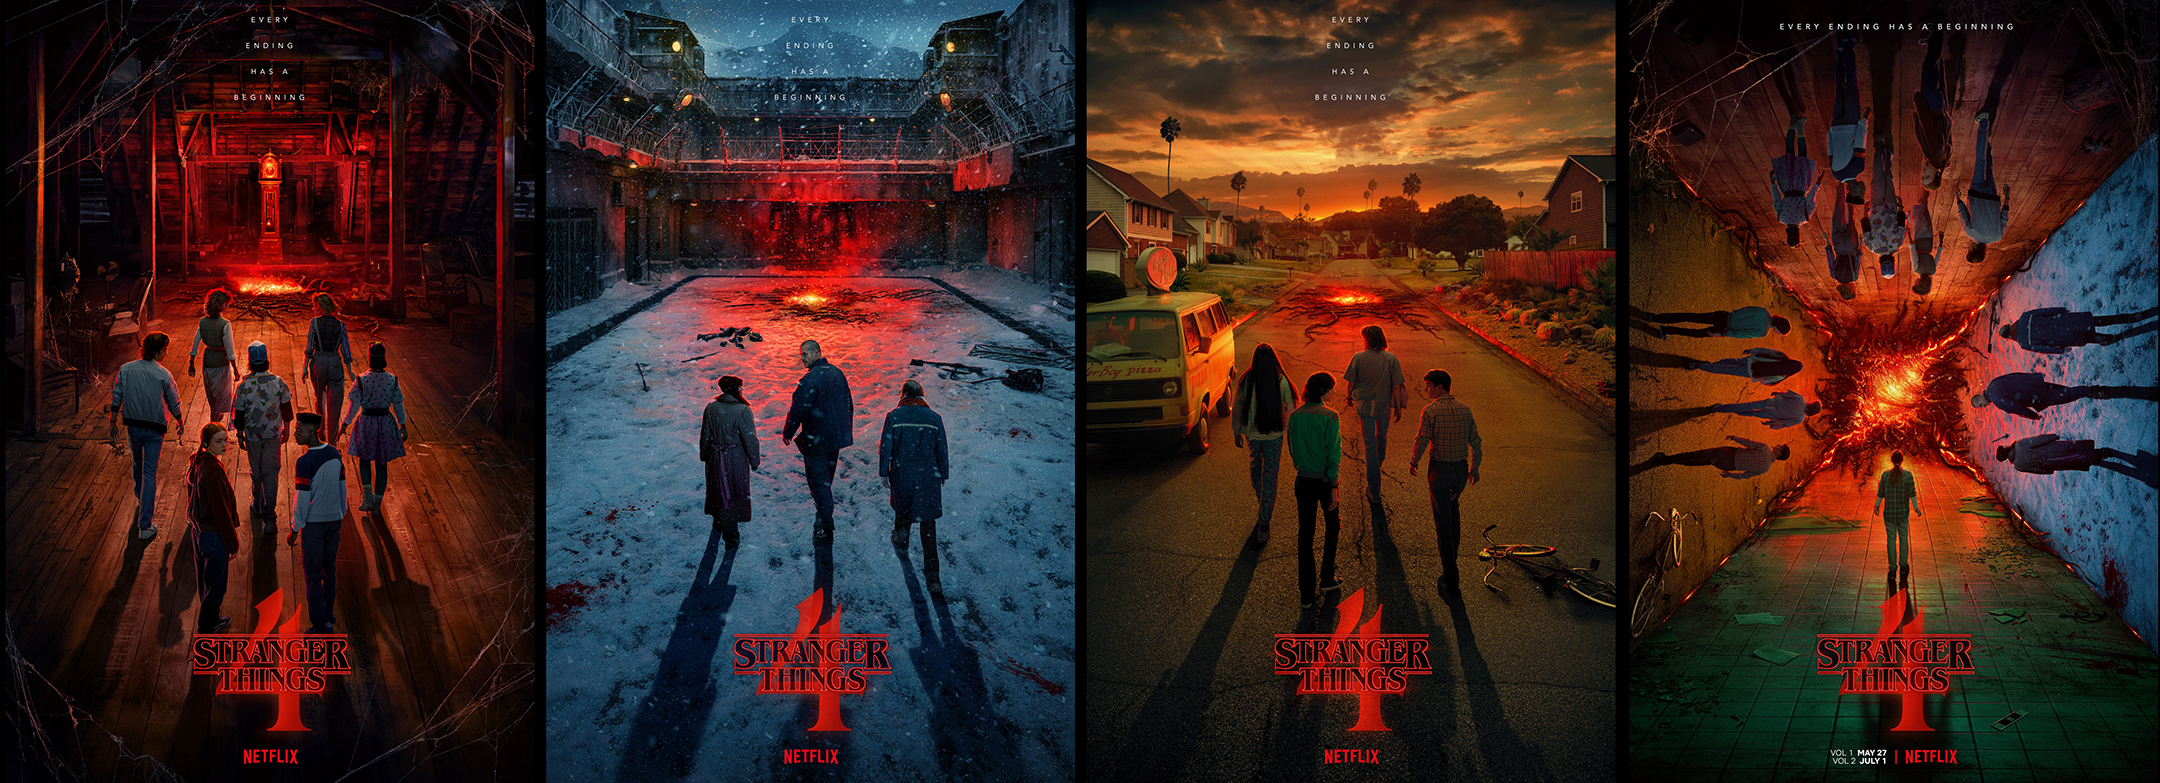 'Stranger Things' Season 4 Release Date Announced as Series Winds Down